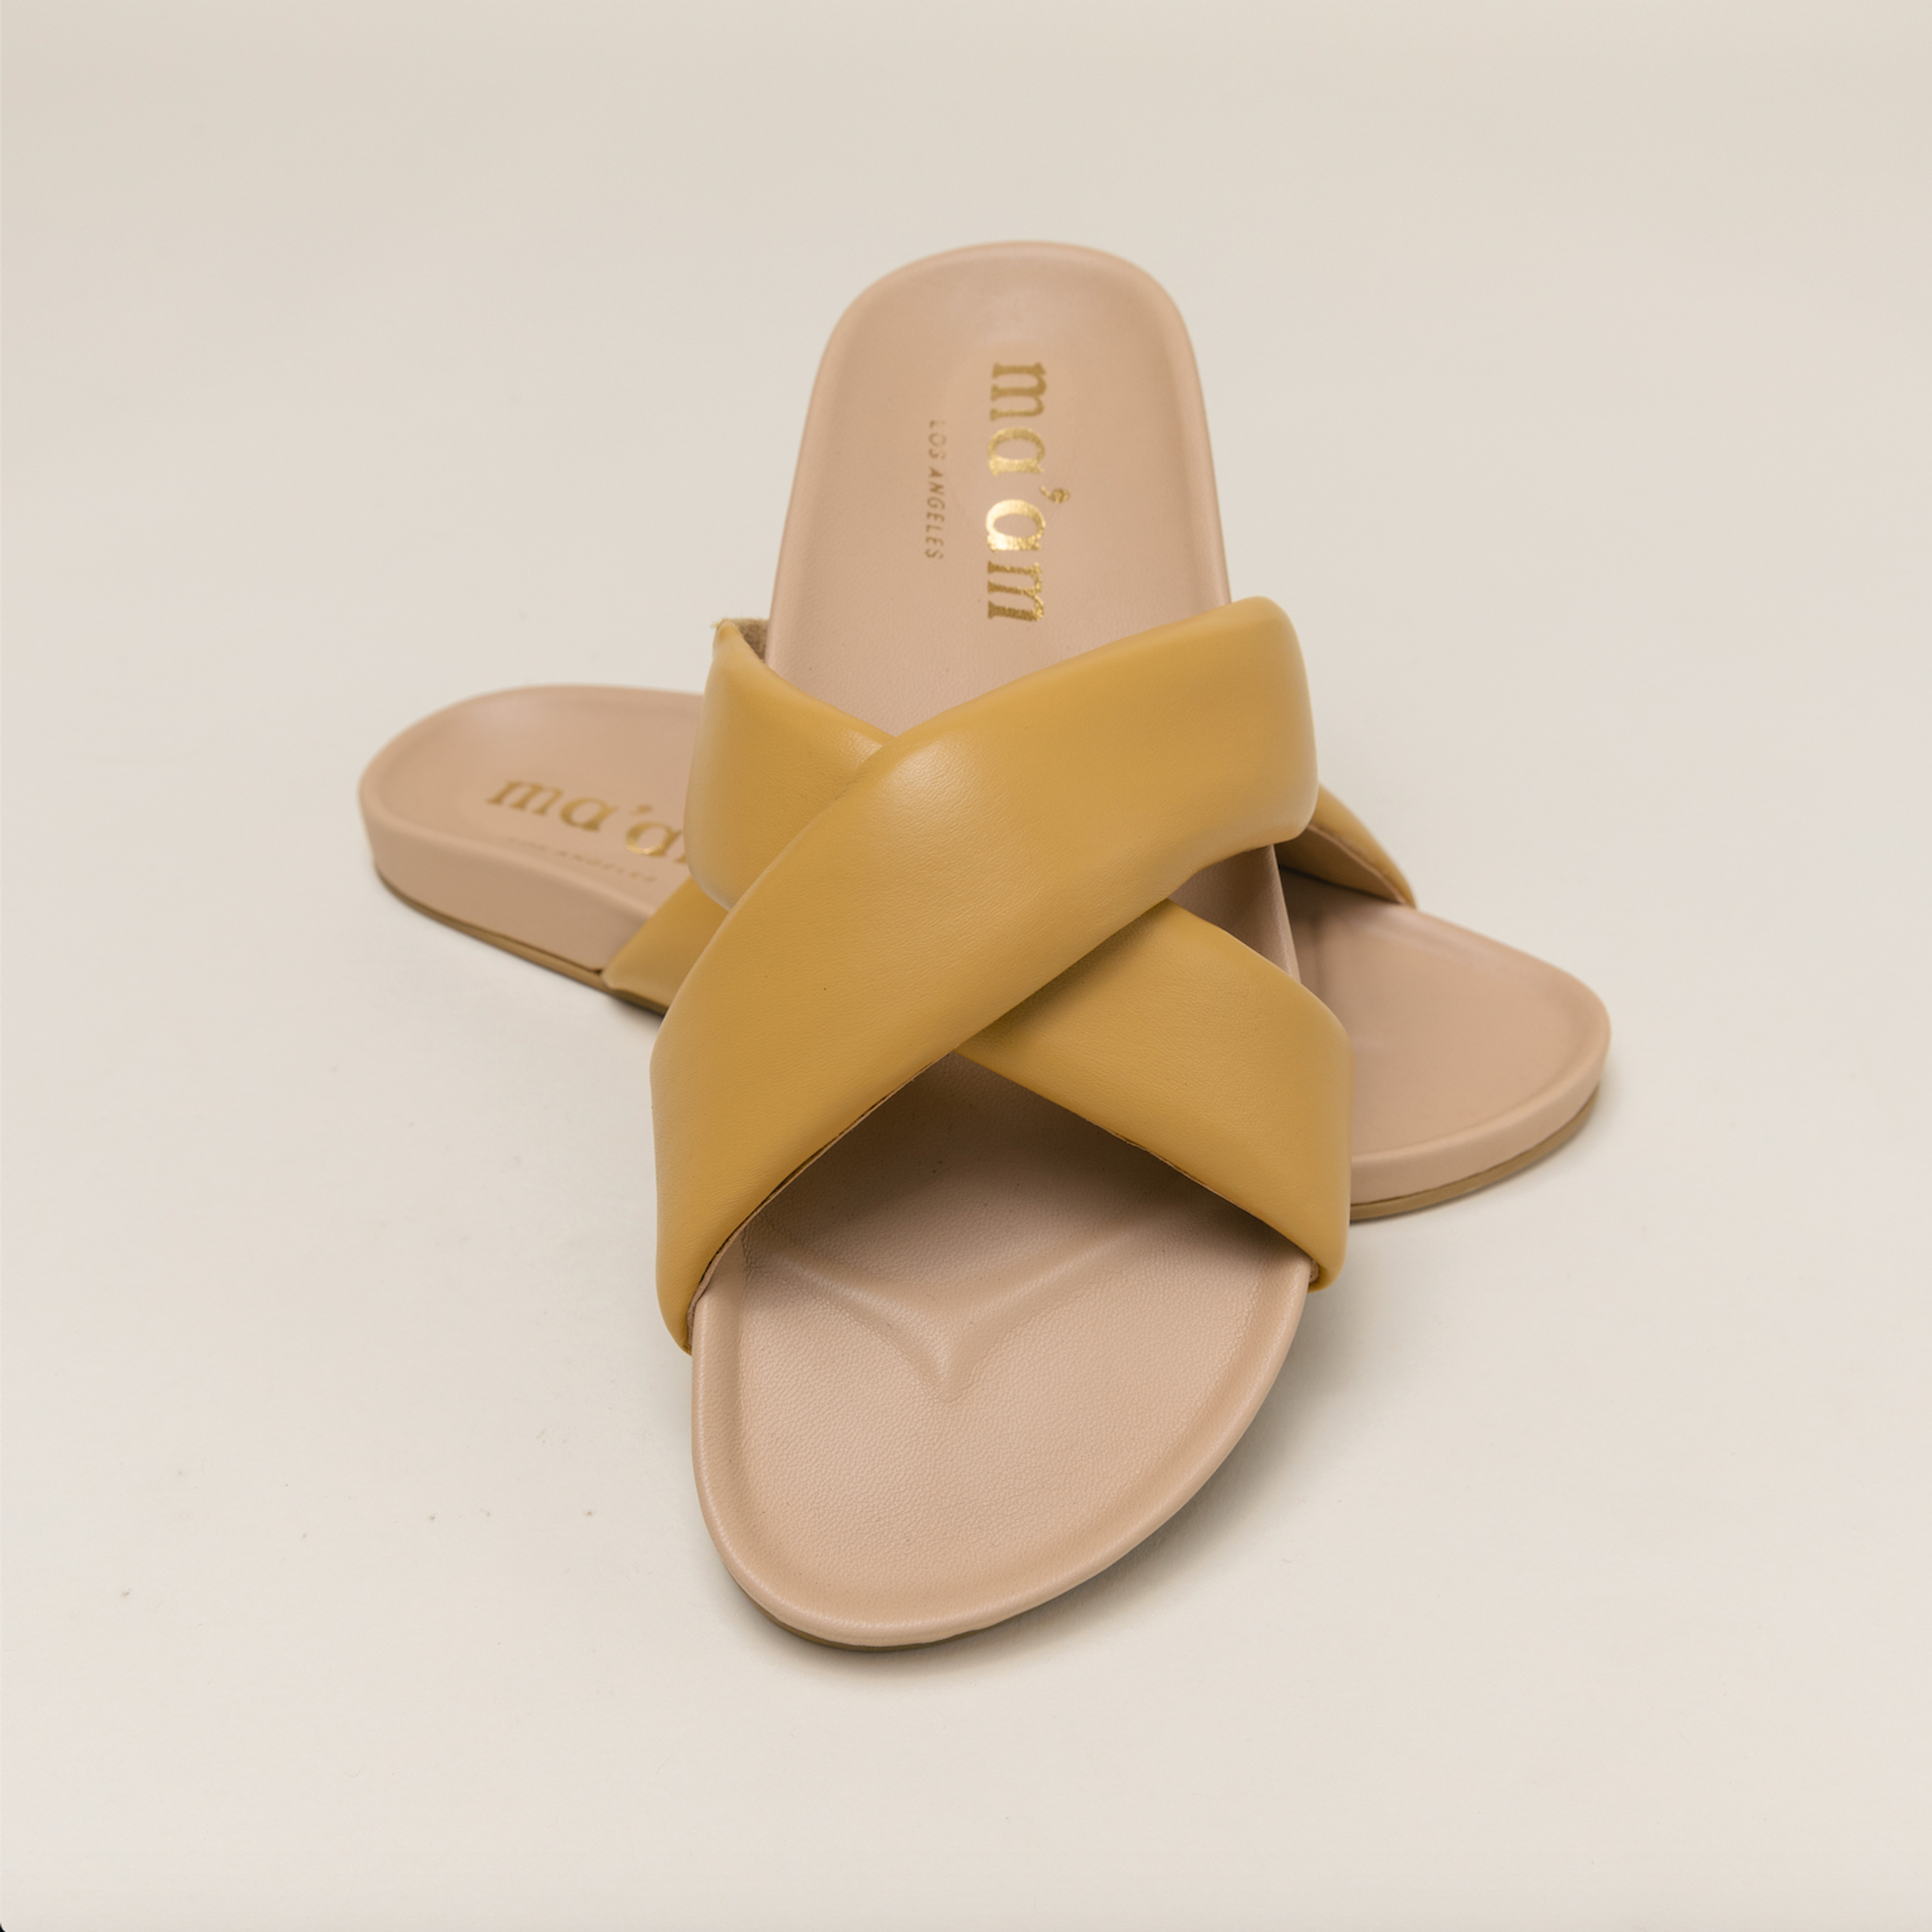 Dolly Sandals - Mustard